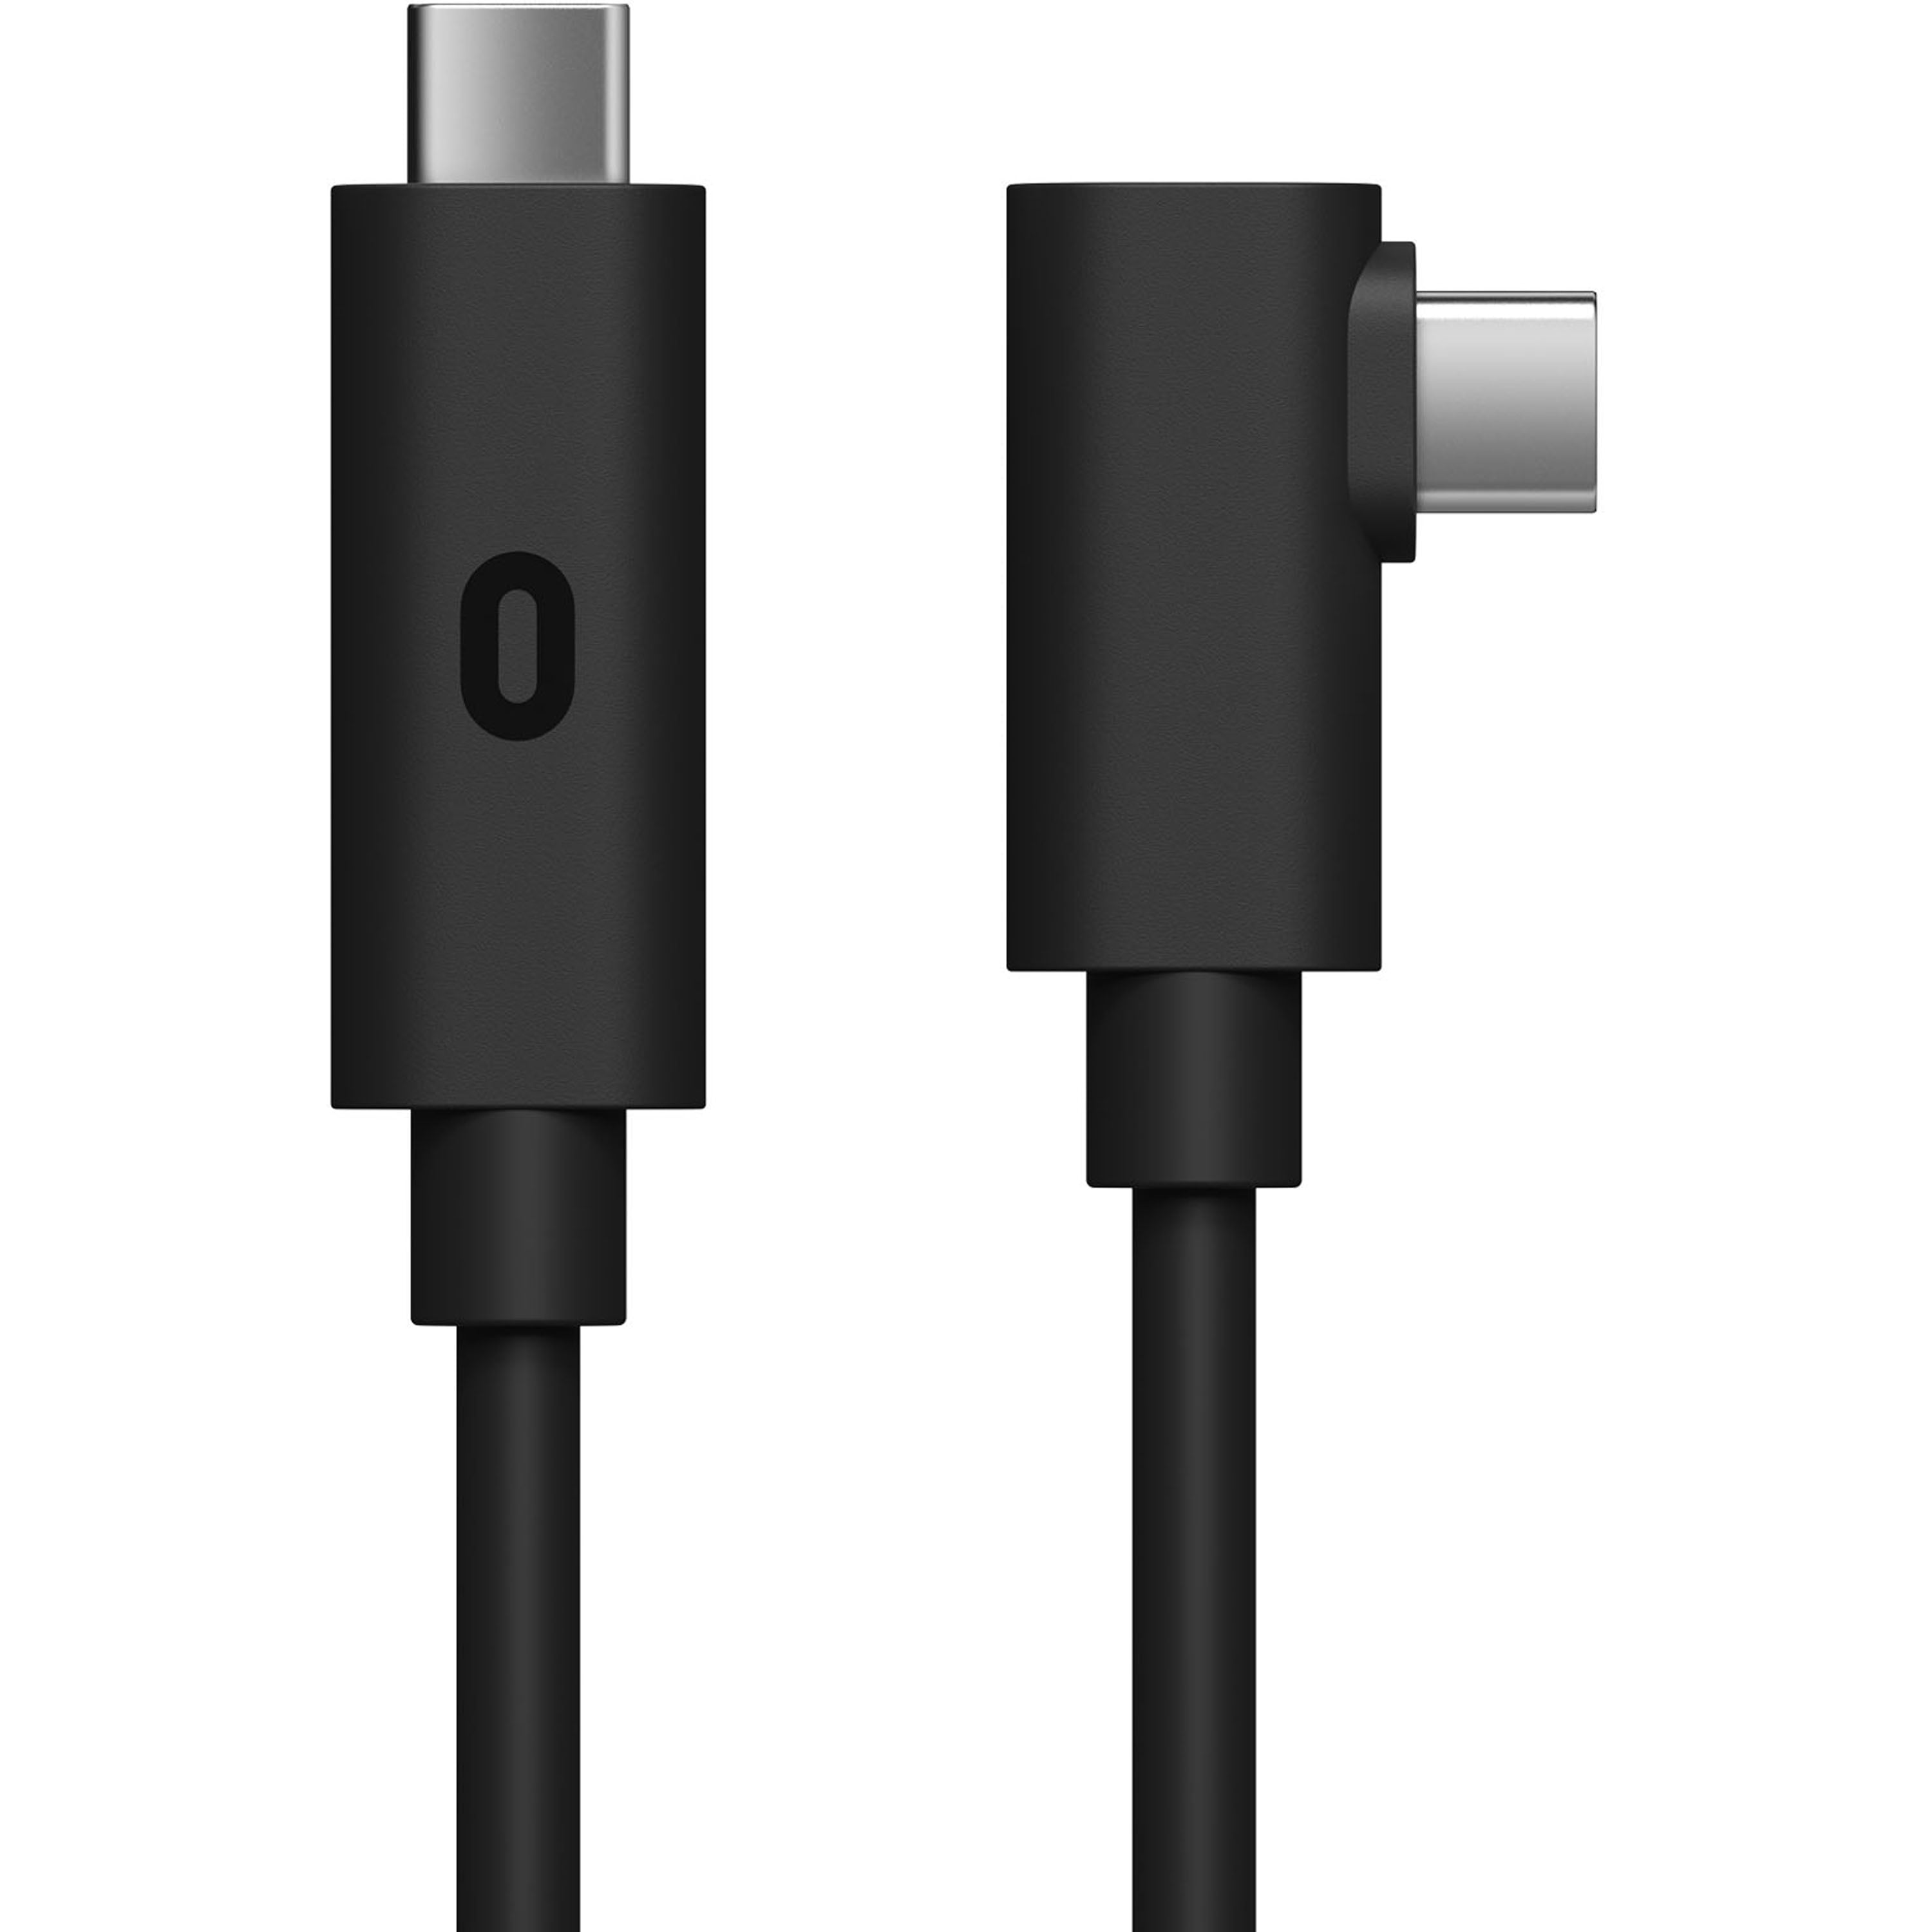 usb c cable oculus link